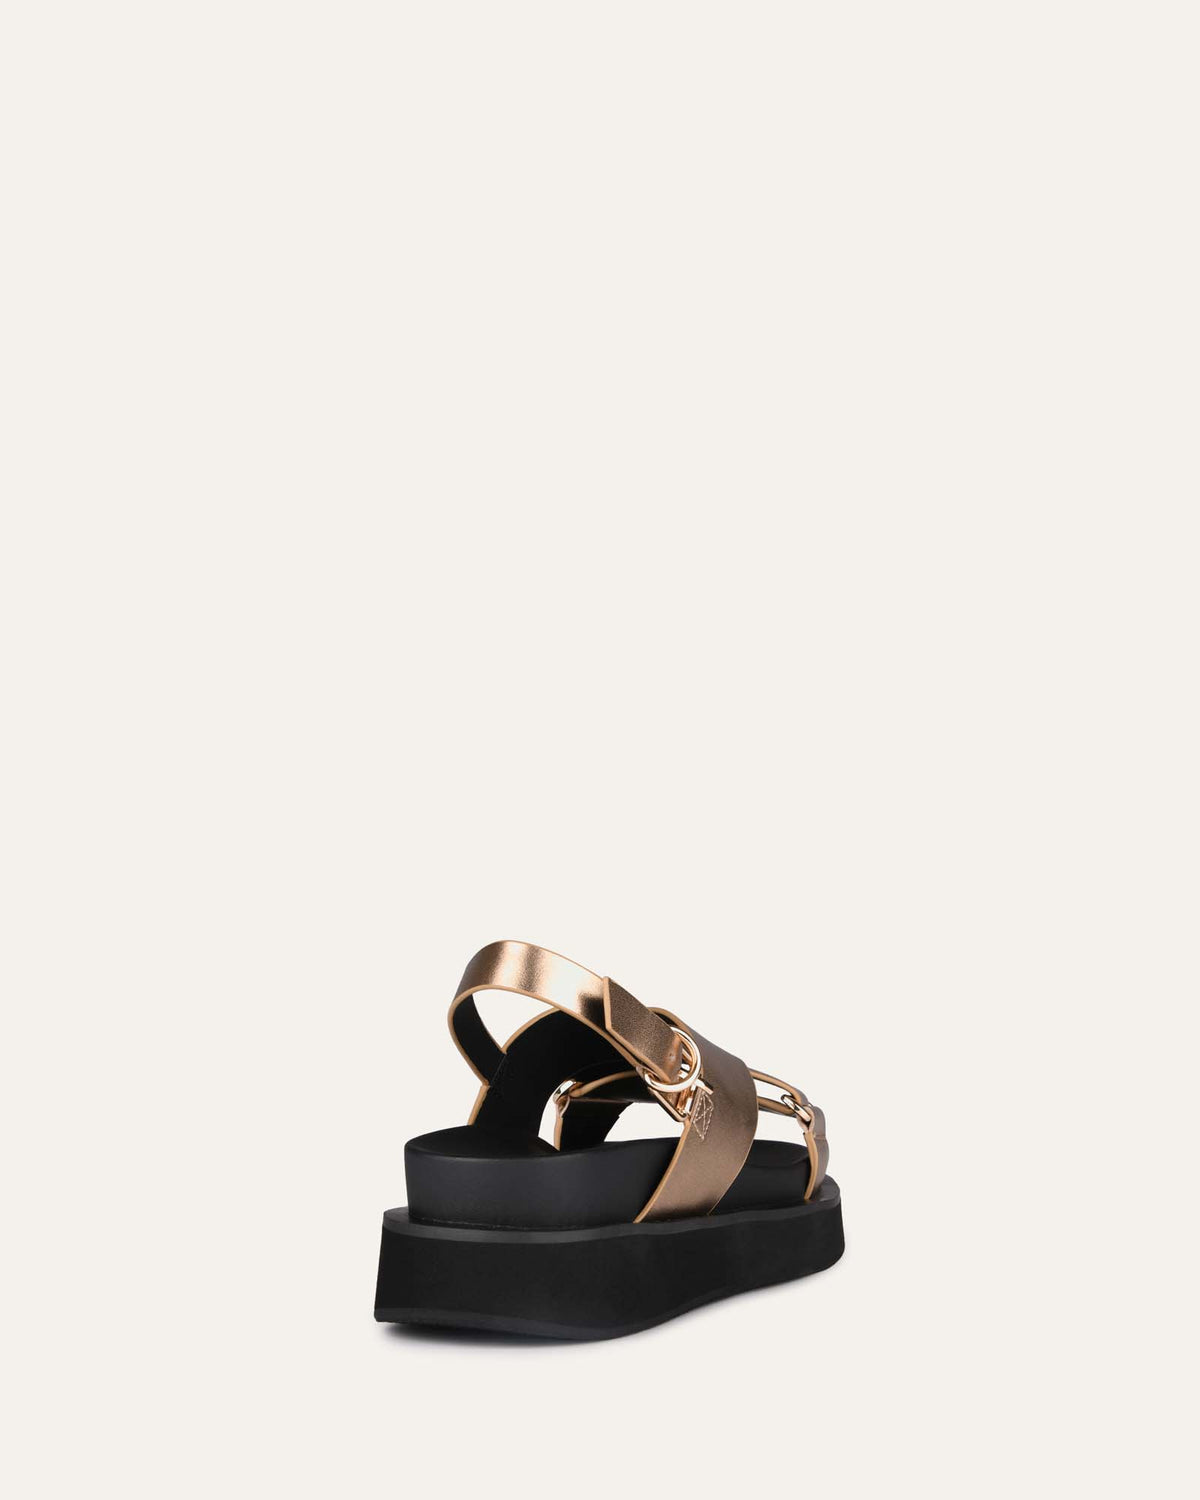 MARLEY FLAT SANDALS GOLD LEATHER